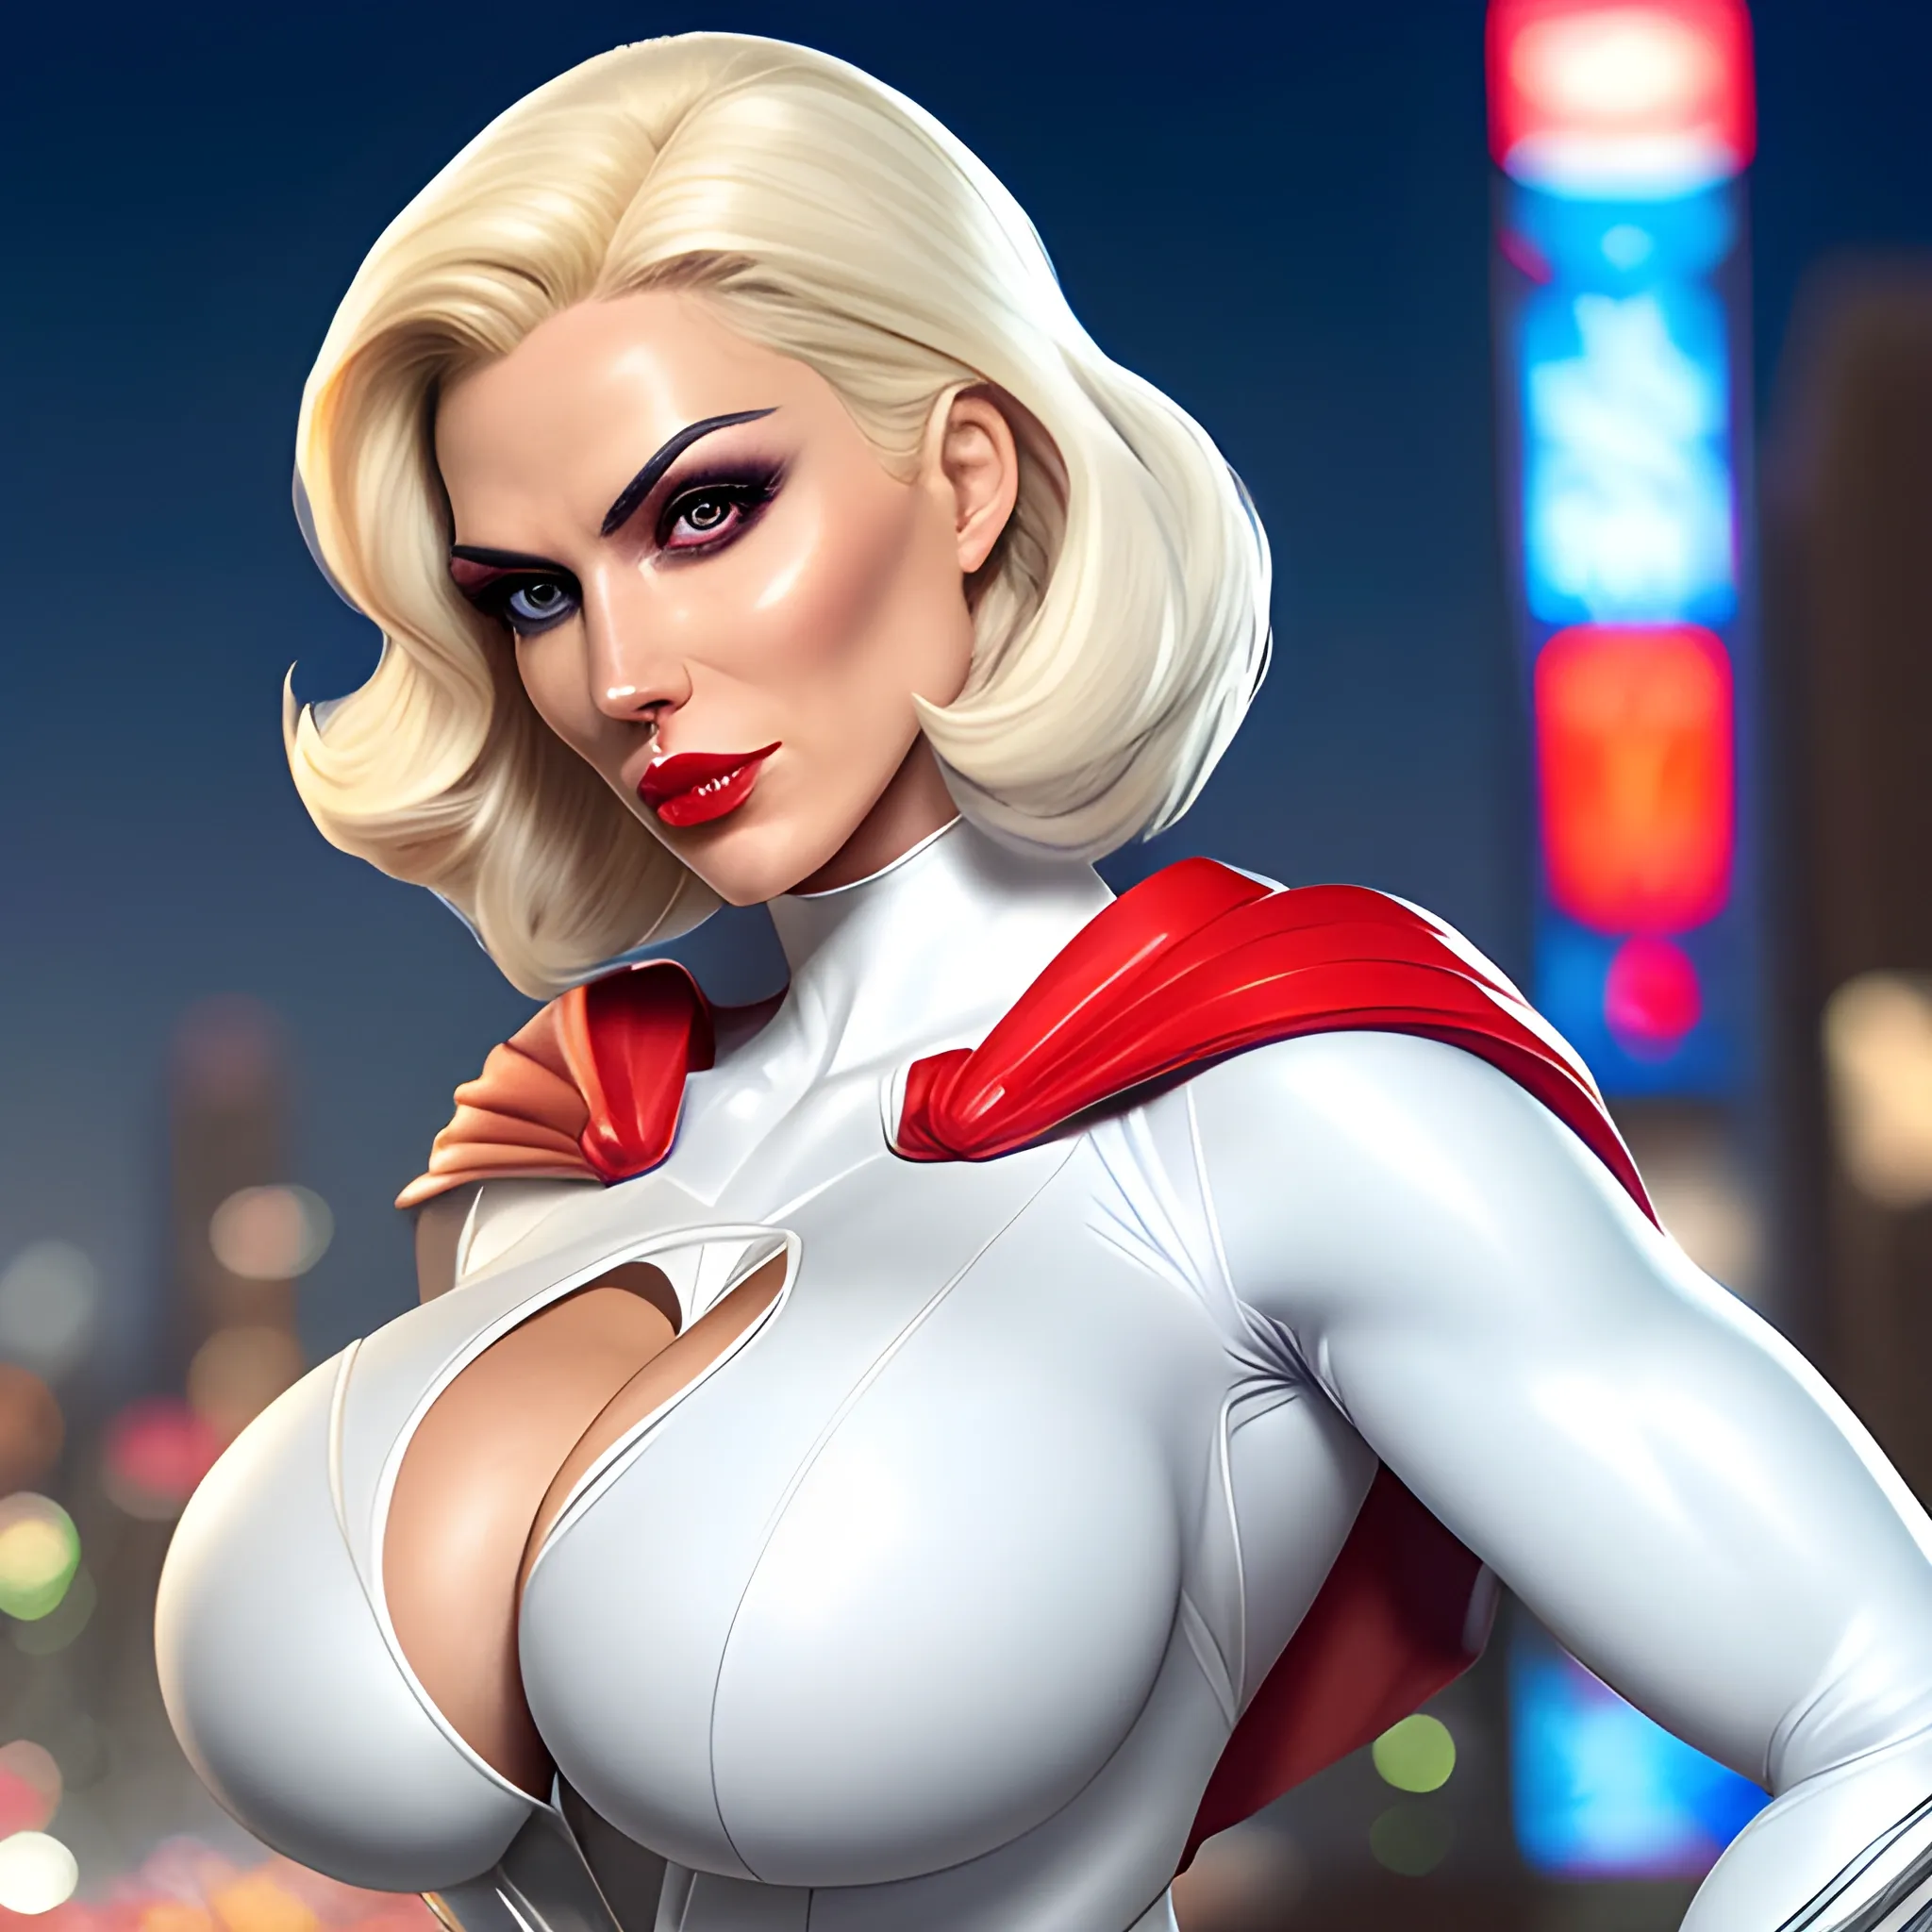 hyper beautiful hyper thick cleavage hyper realistic hyper photorealistic PowerGirl™ from DC Comics™, PowerGirl™ from DC Comics™ fan art, hyper realistic PowerGirl™ from DC Comics™ fan art, hyper dynamic short blonde hair style, wearing hyper detailed hyper classic PowerGirl™ solid white unitard costume cleavage window, wearing hyper detailed red cape attached to shoulders, wearing hyper detailed blue gloves, hyper detailed city lights at night background